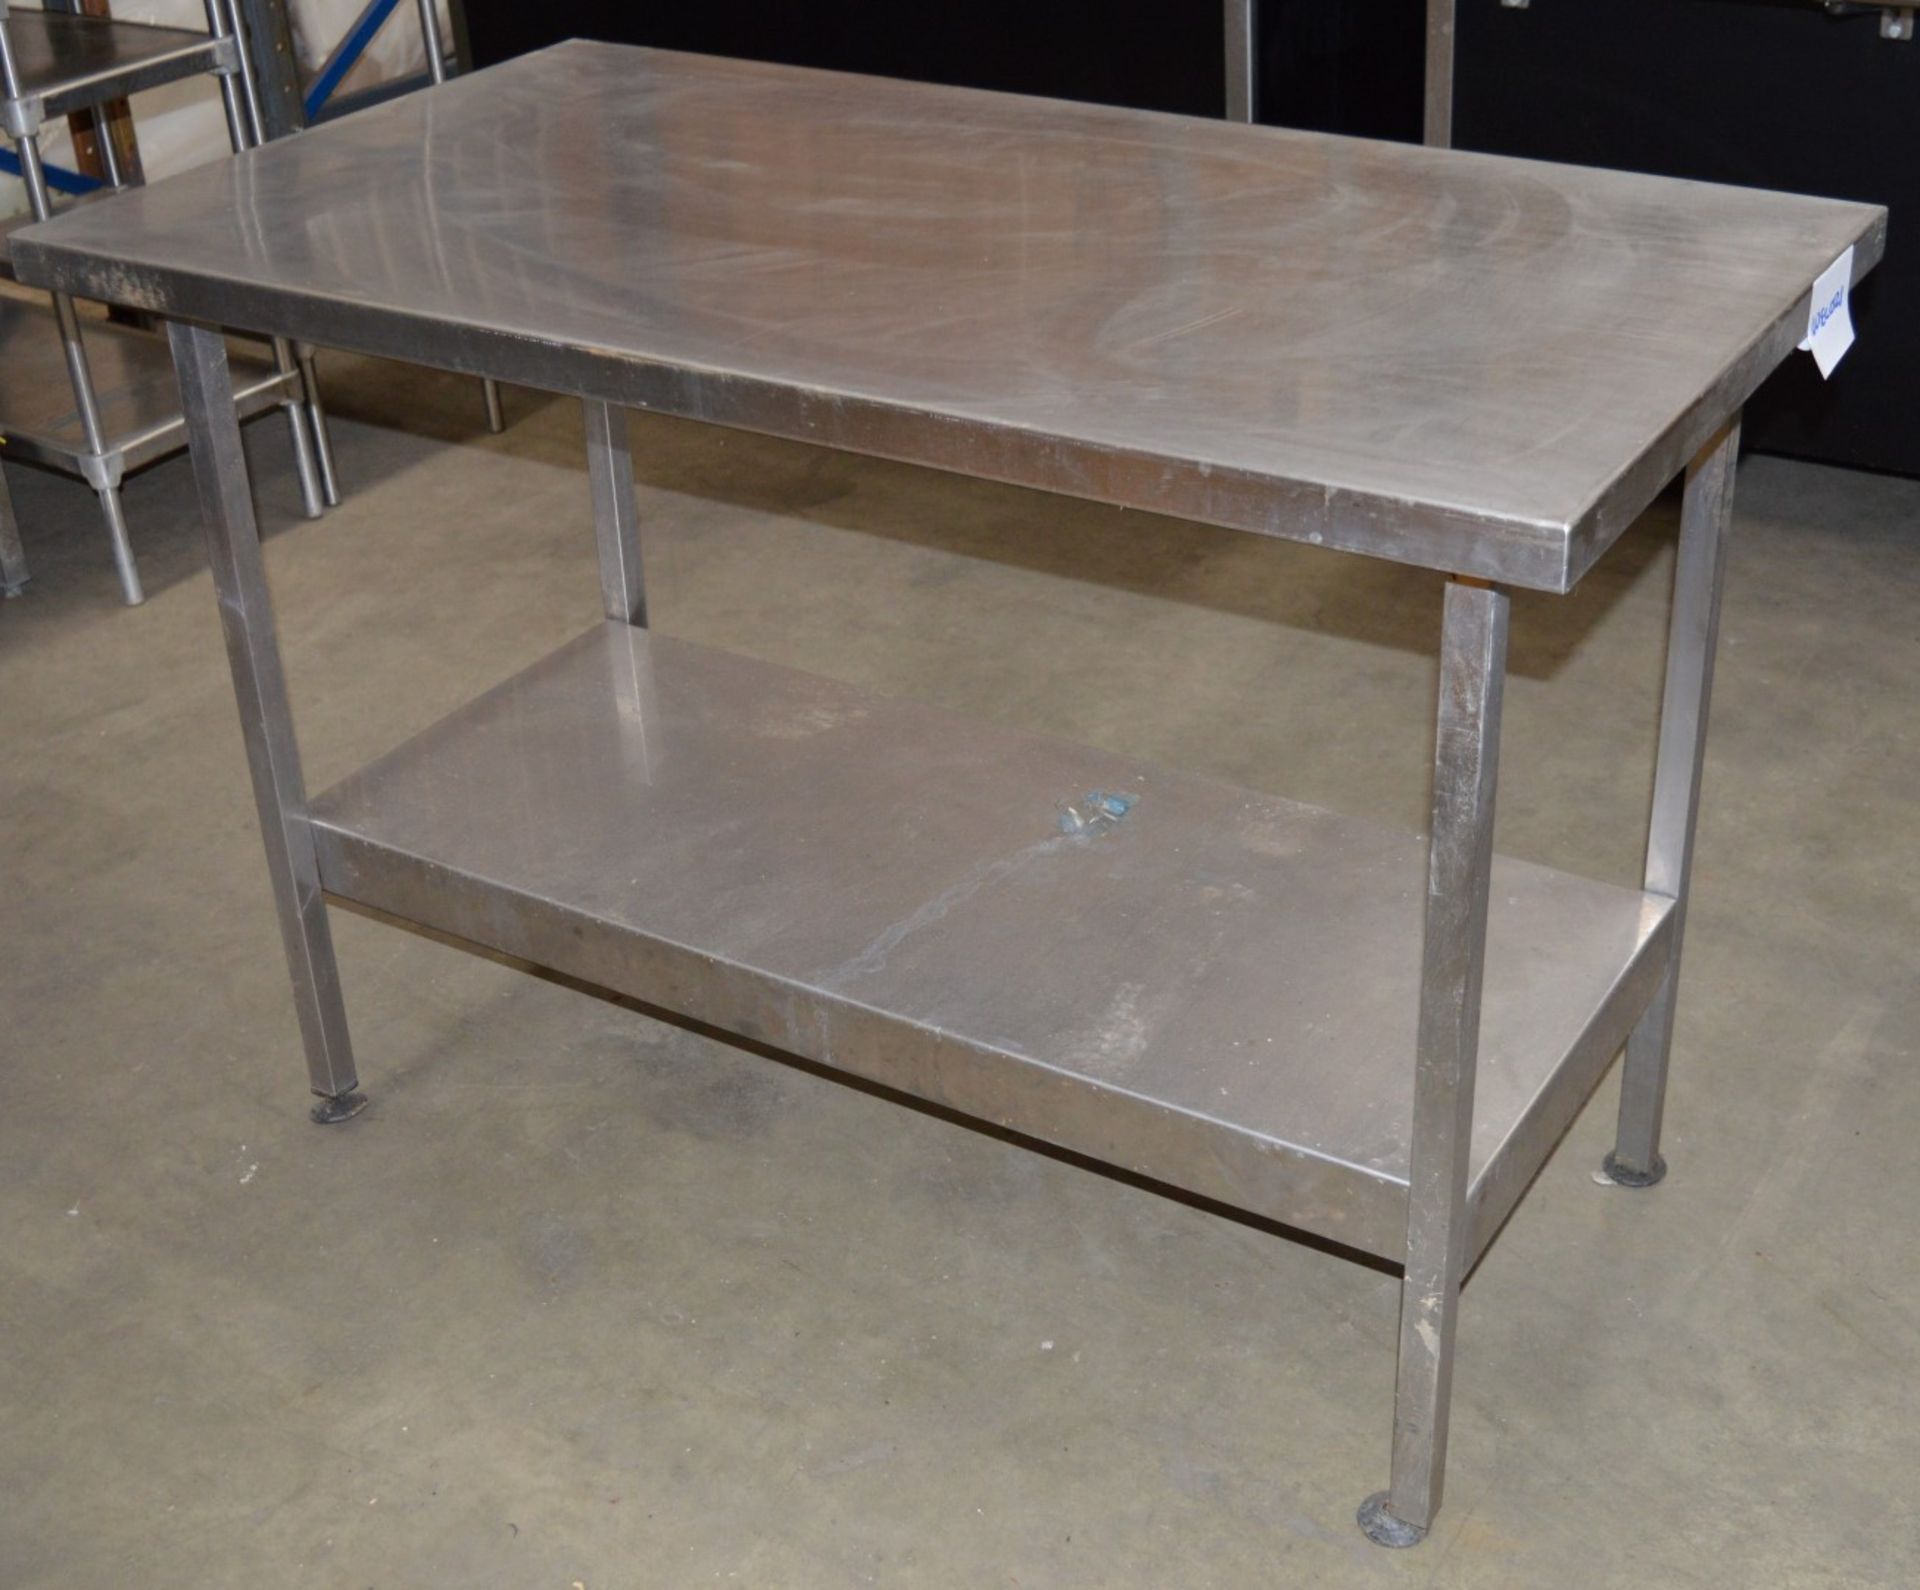 1 x Stainless Steel Commercial Kitchen Prep Bench With Undershelf - CL057 - H86 x W122 x D66 cms -